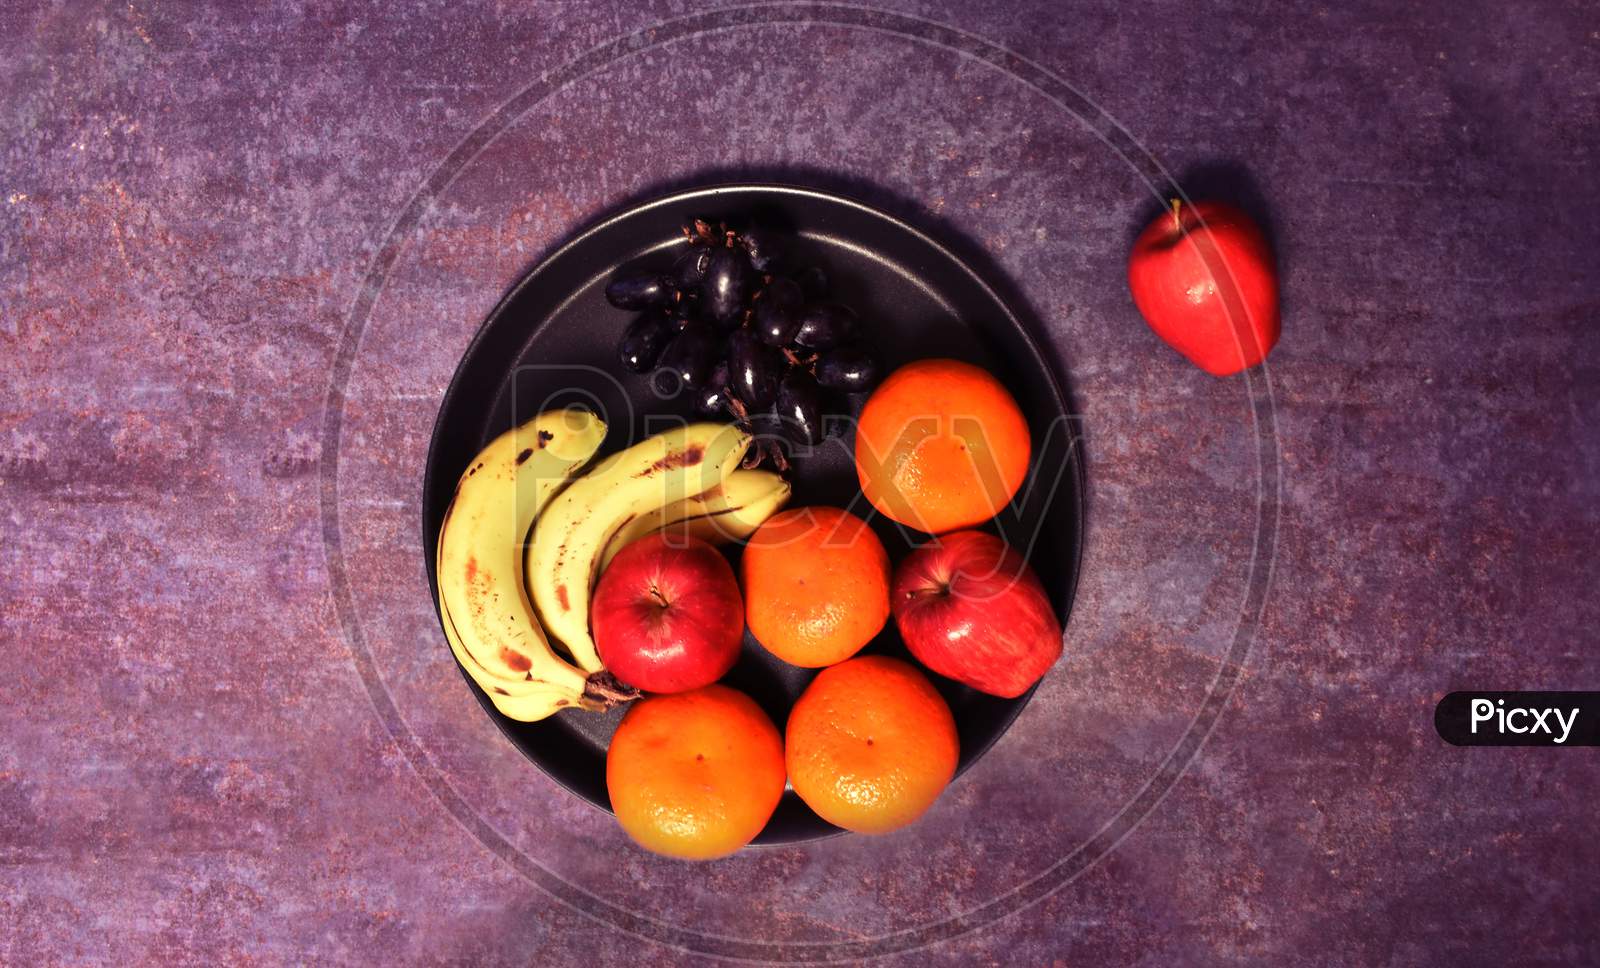 Fruits in a bowl